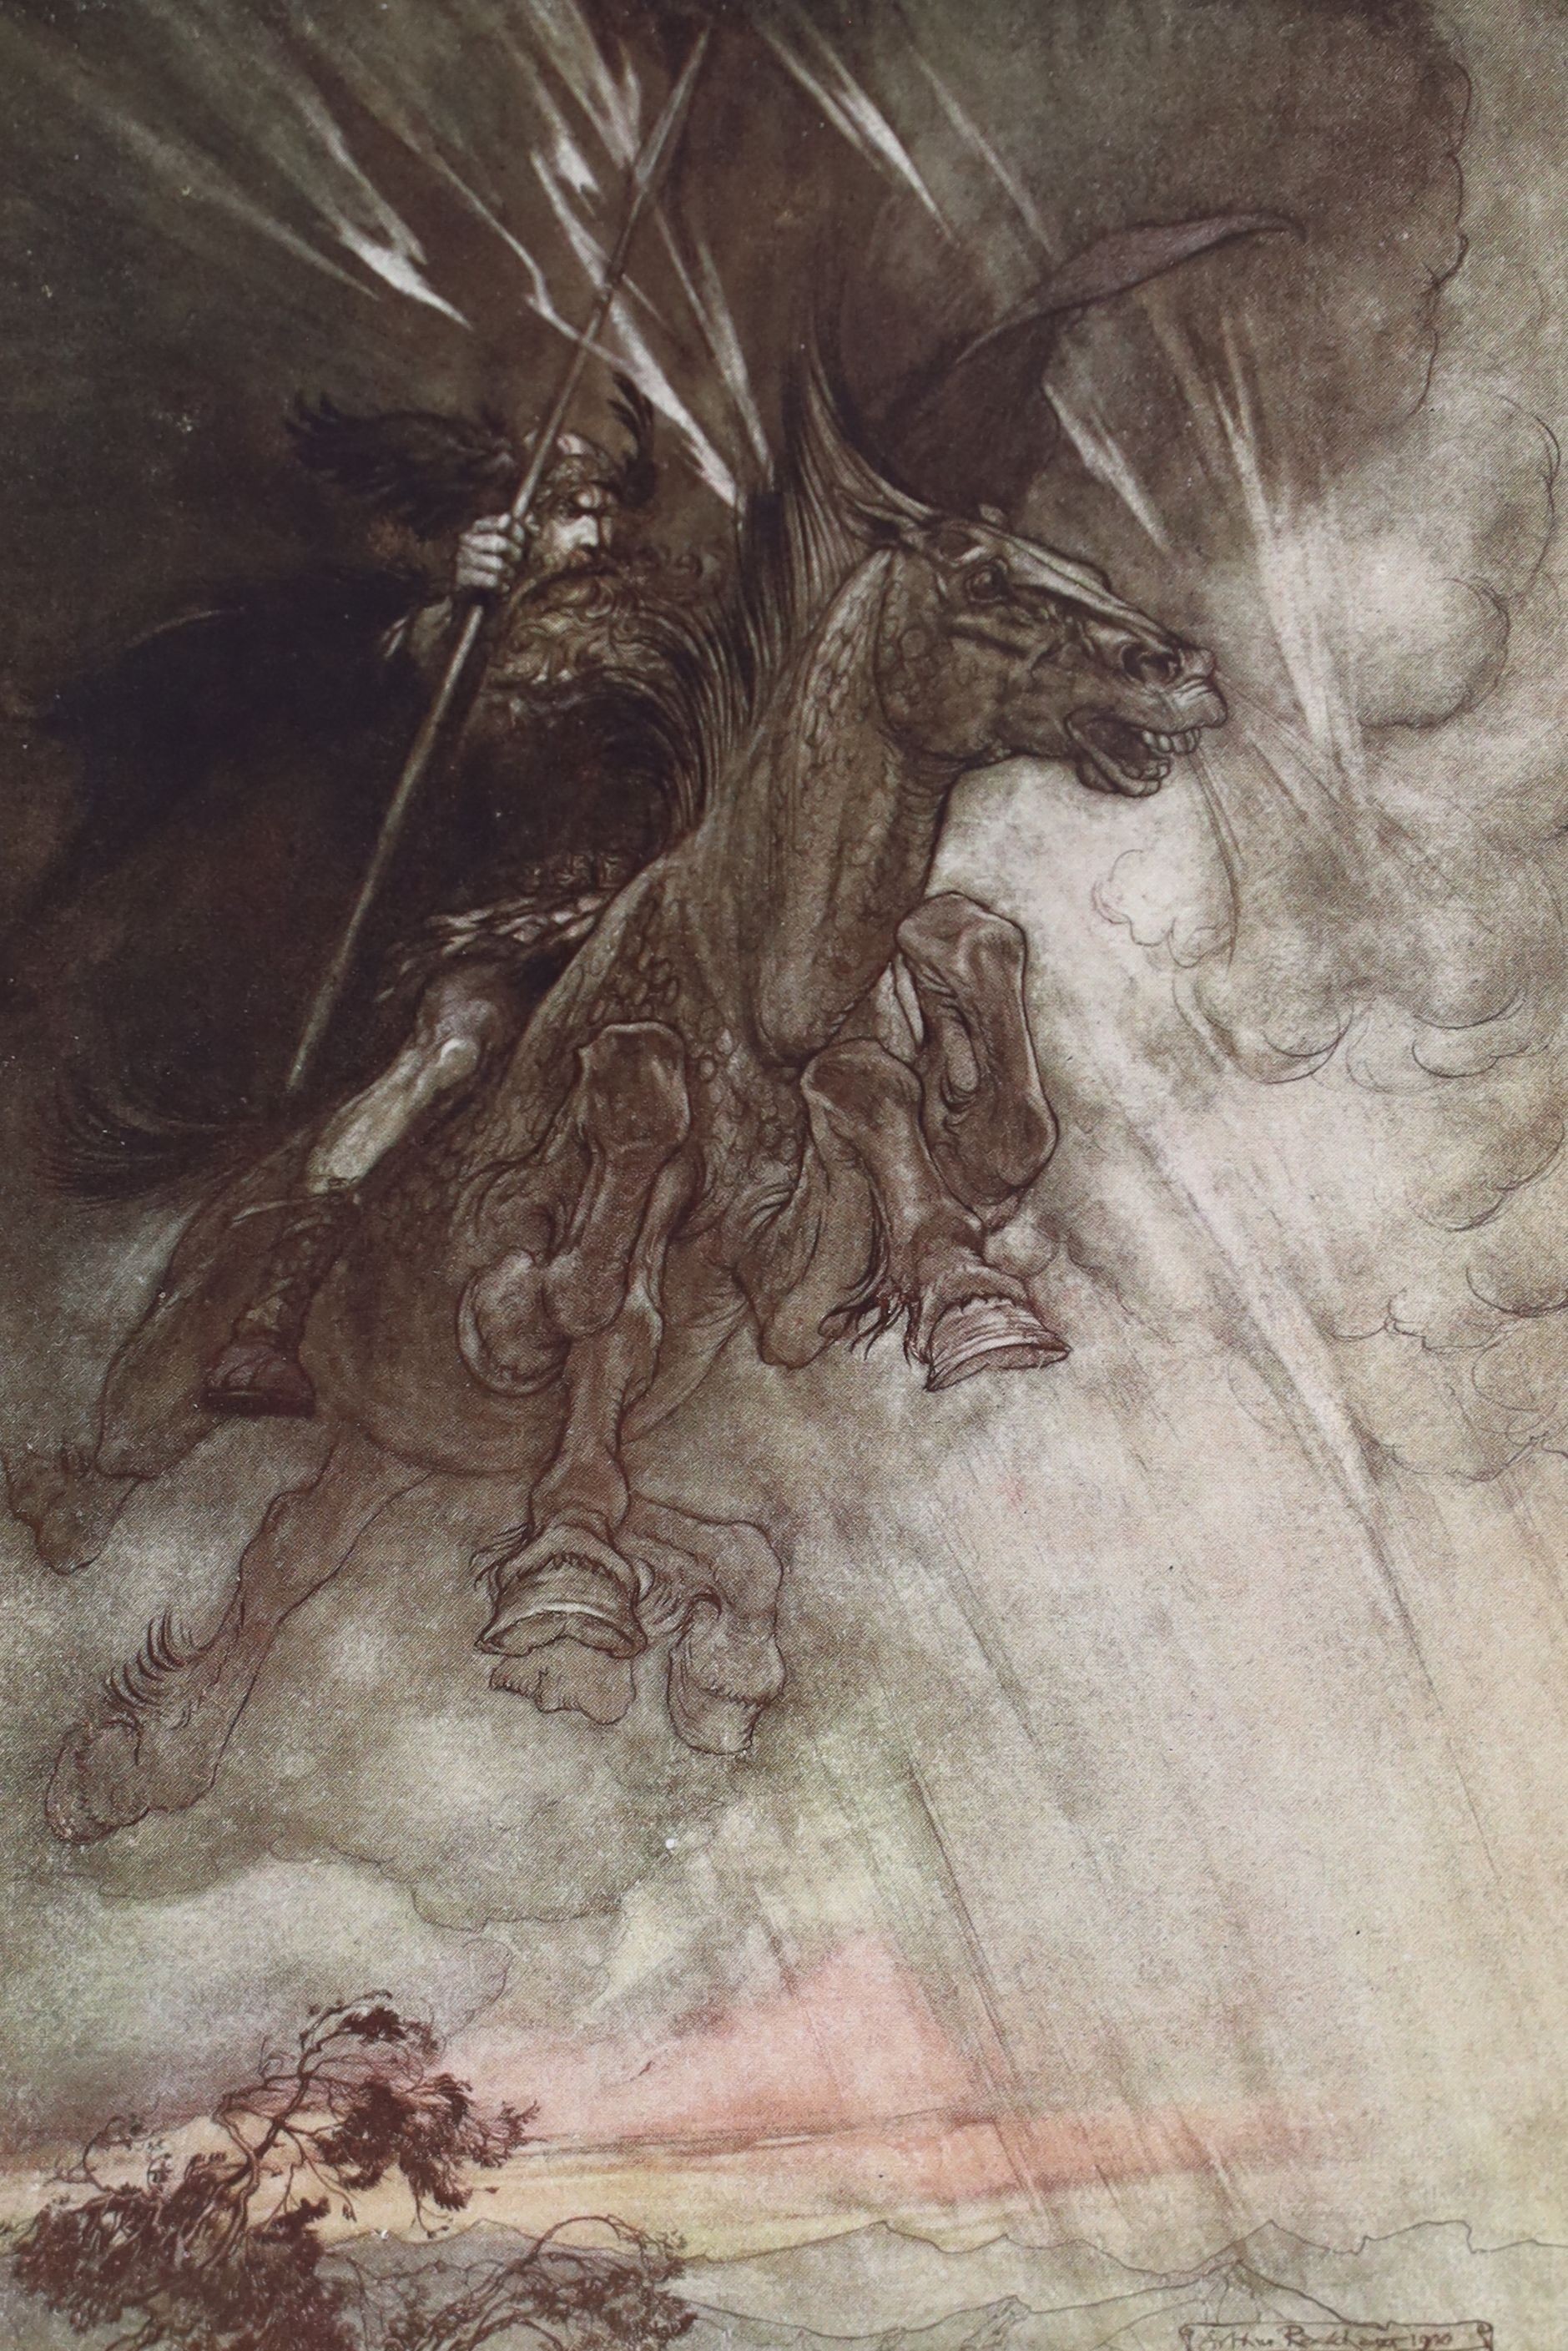 Wagner, Richard - The Ring of the Niblung, first 2 vol. set, Siegfried and the Twilight of the Gods, illustrated by Arthur Rackham, translated by Margaret Armour, with 30 tipped-in colour plates, William Heinemann, Londo